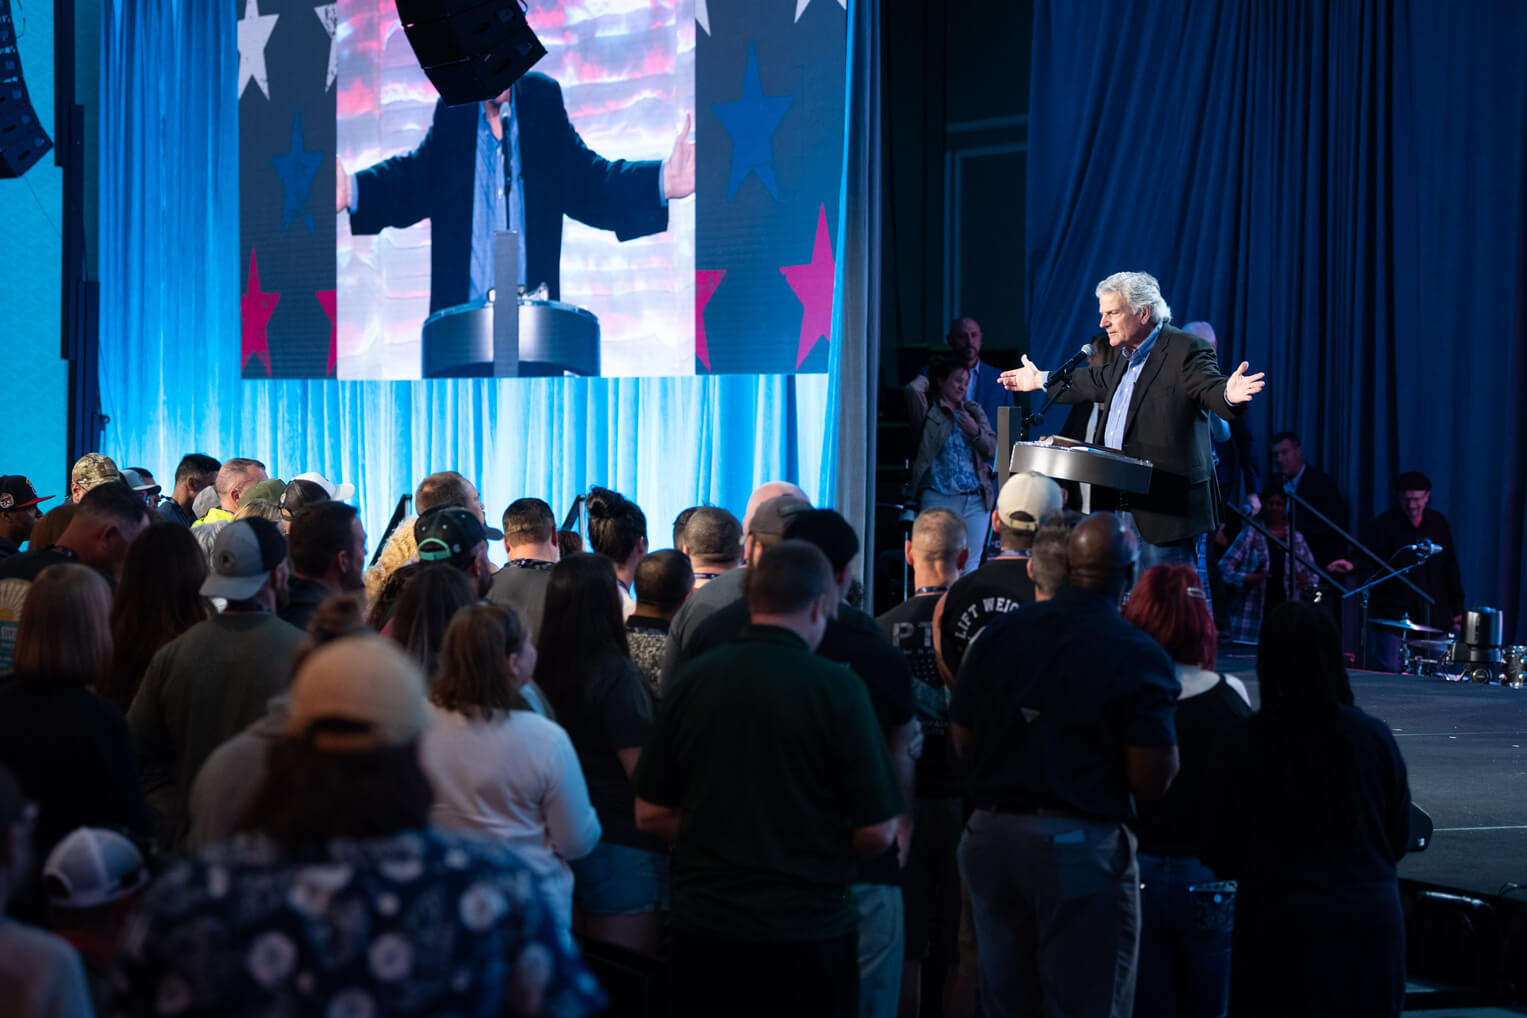 Franklin Graham prays for the Operation Heal Our Patriots family at the recent Reunion.